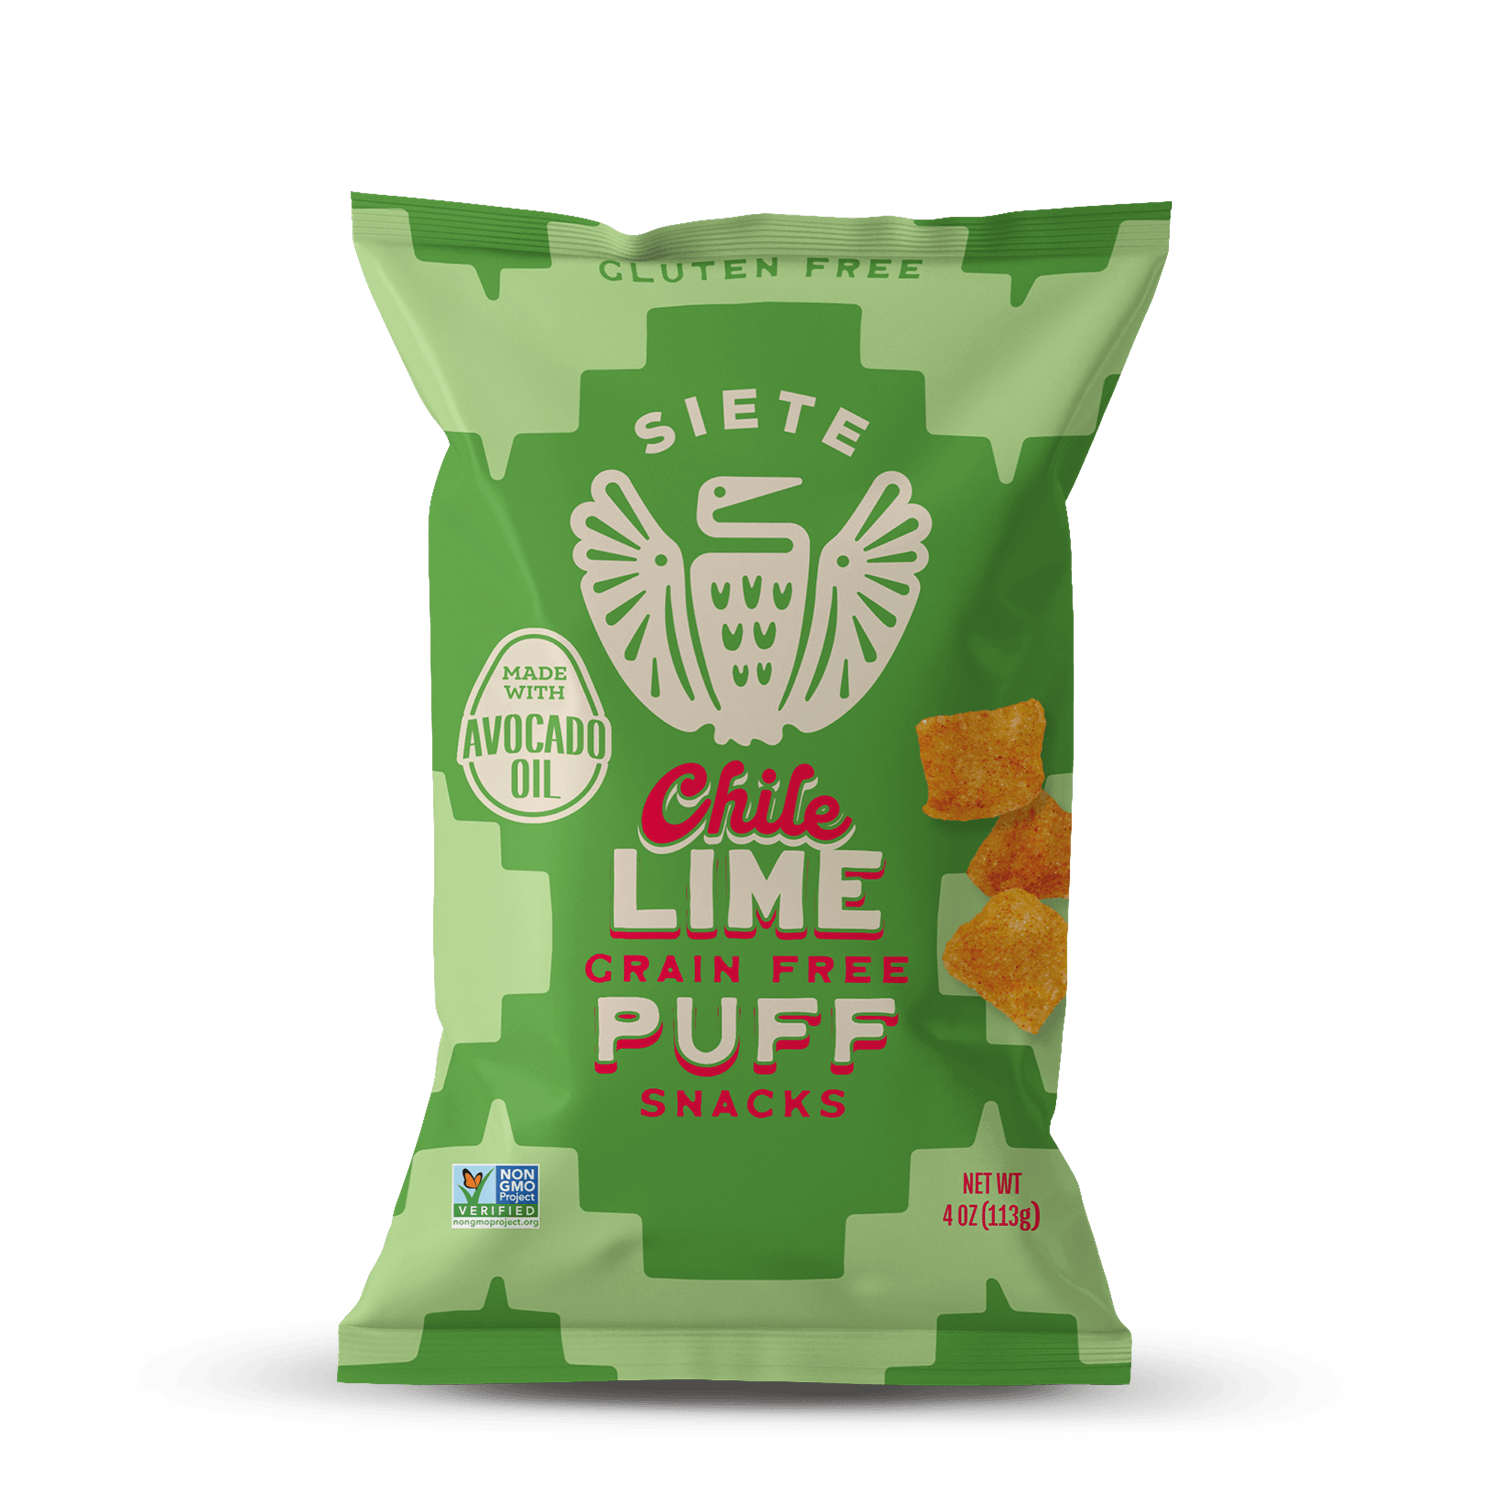 Mix Pack Kettle Cooked Potato Chips - 6 bags